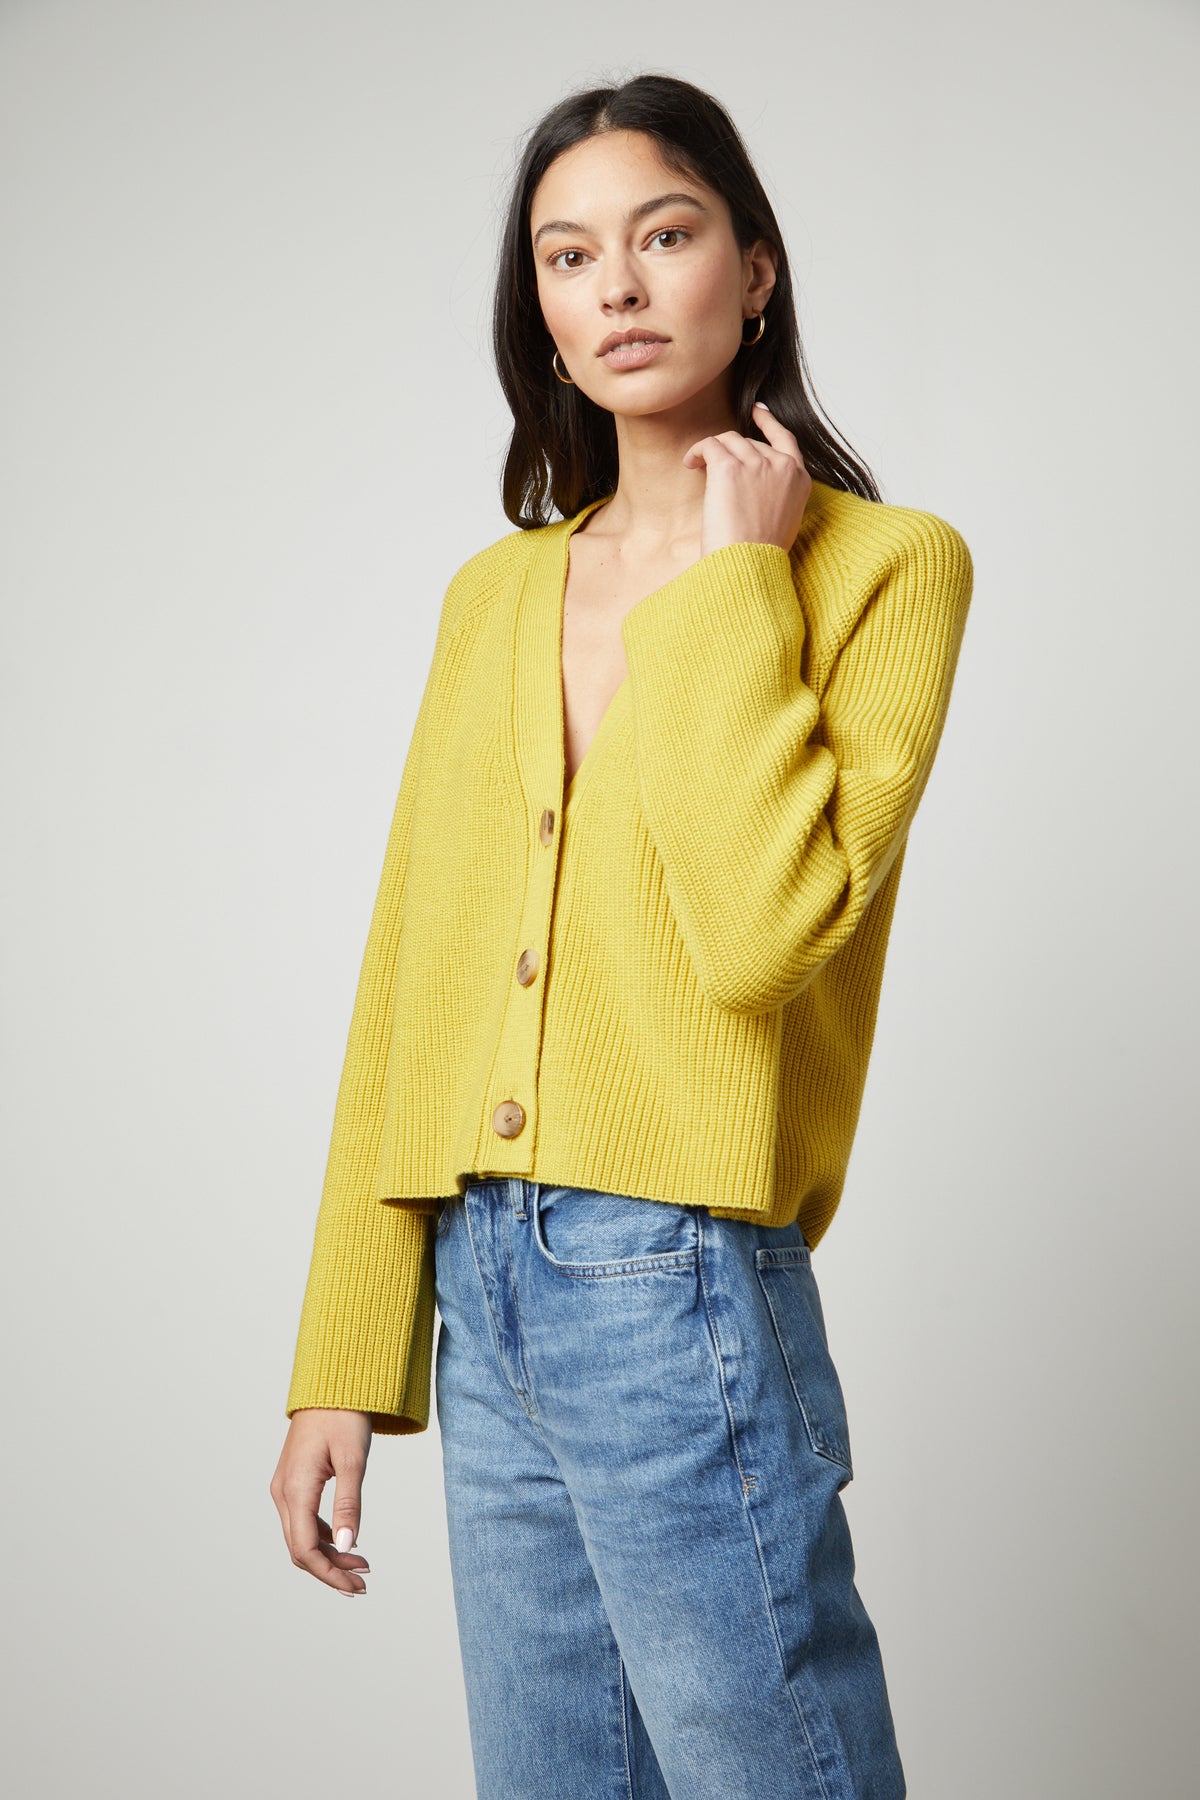 The model is wearing the Marilyn Button Front Cardigan in sunflower yellow by Velvet by Graham & Spencer and jeans.-26727746961601